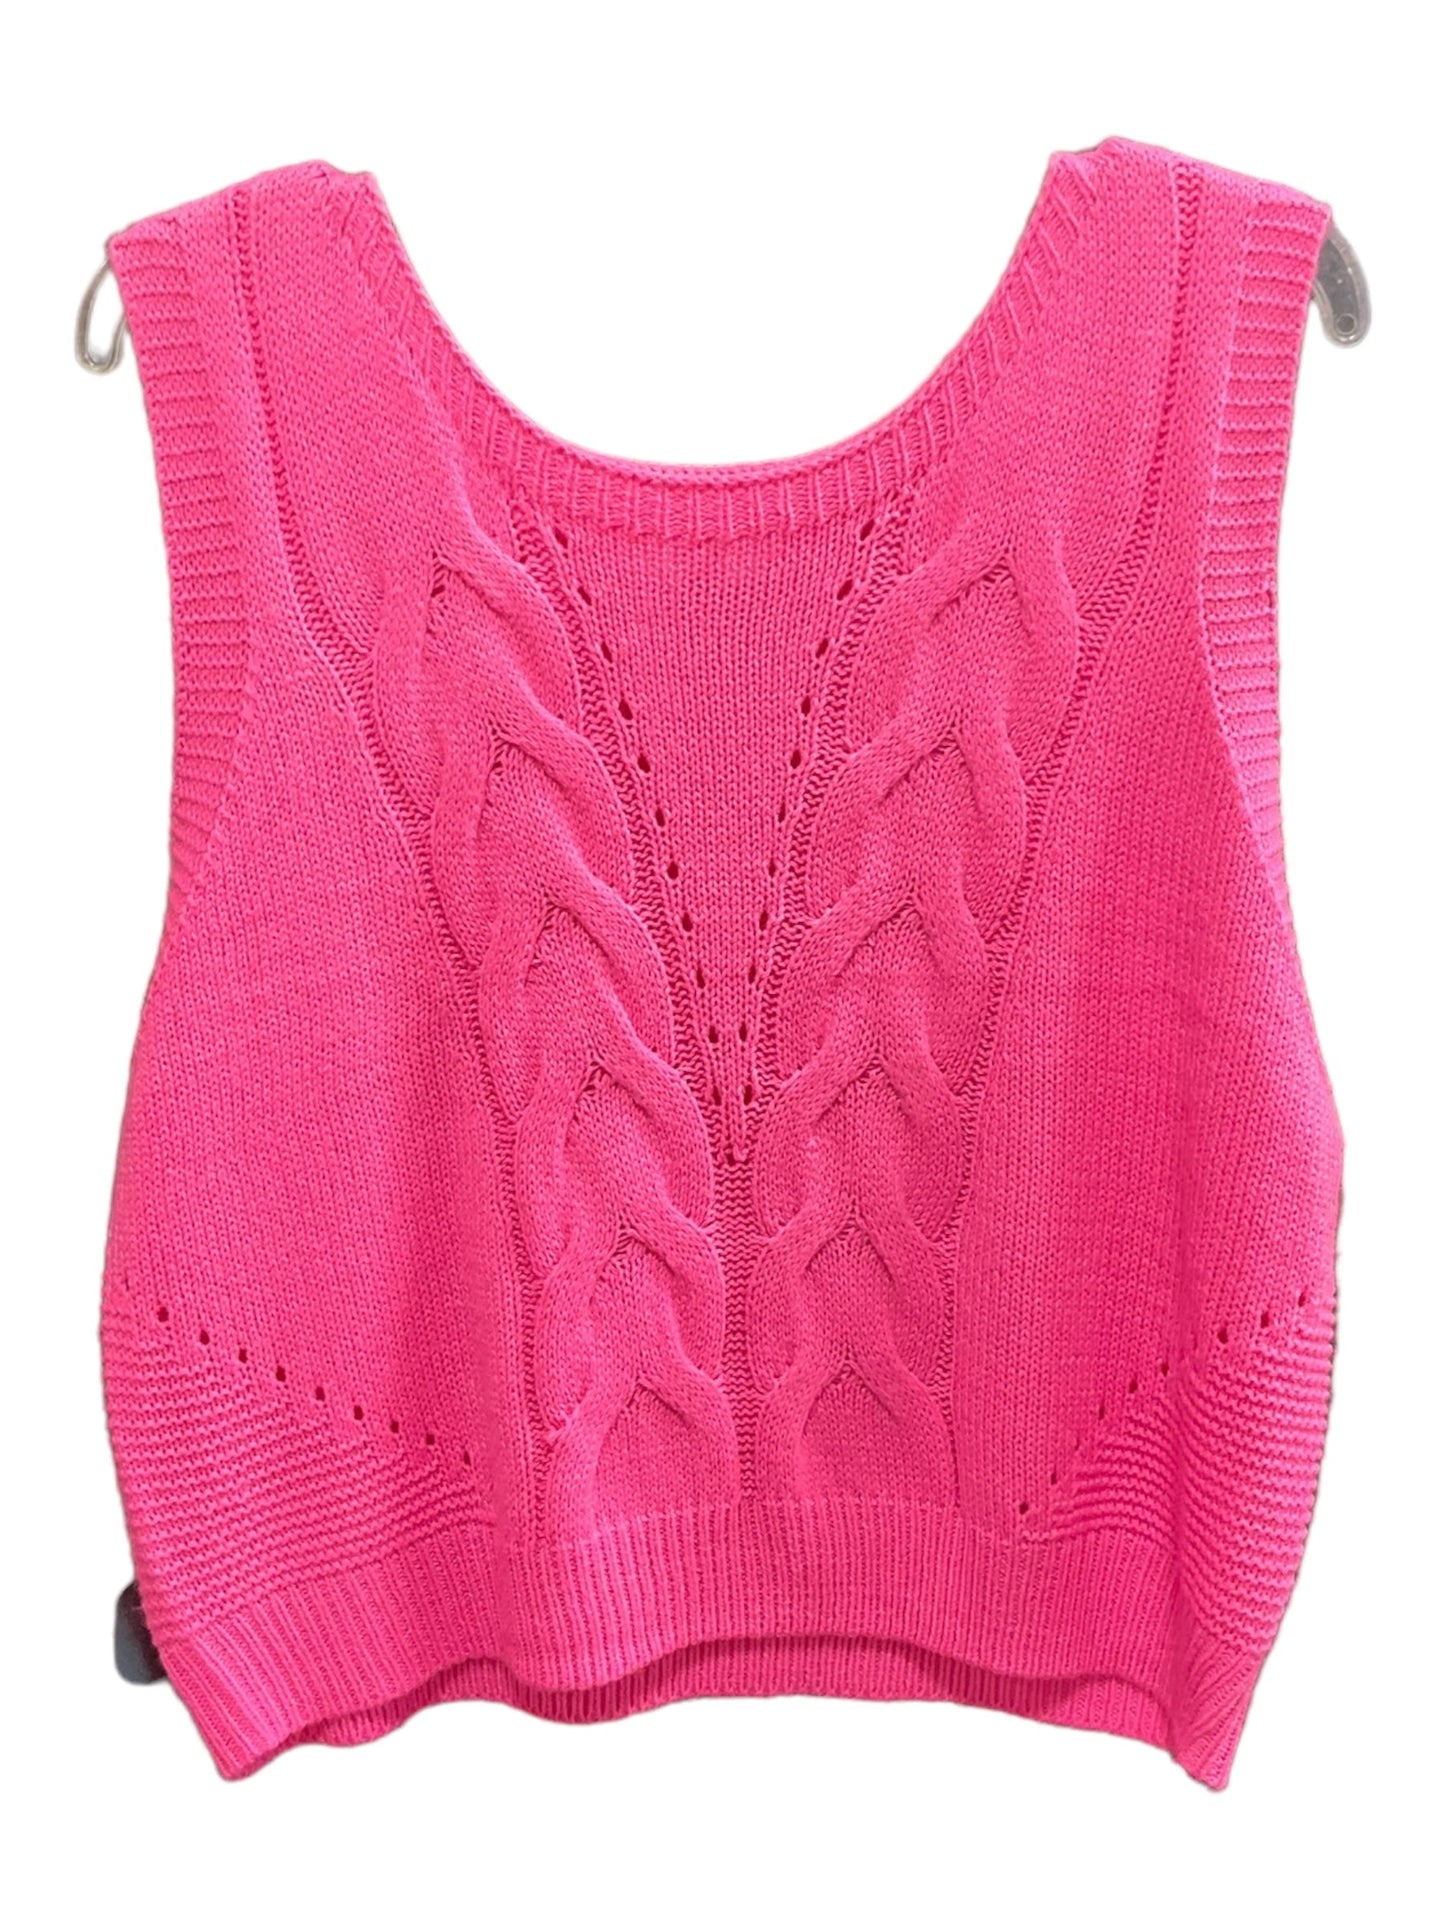 Pink Sweater Short Sleeve Clothes Mentor, Size 3x